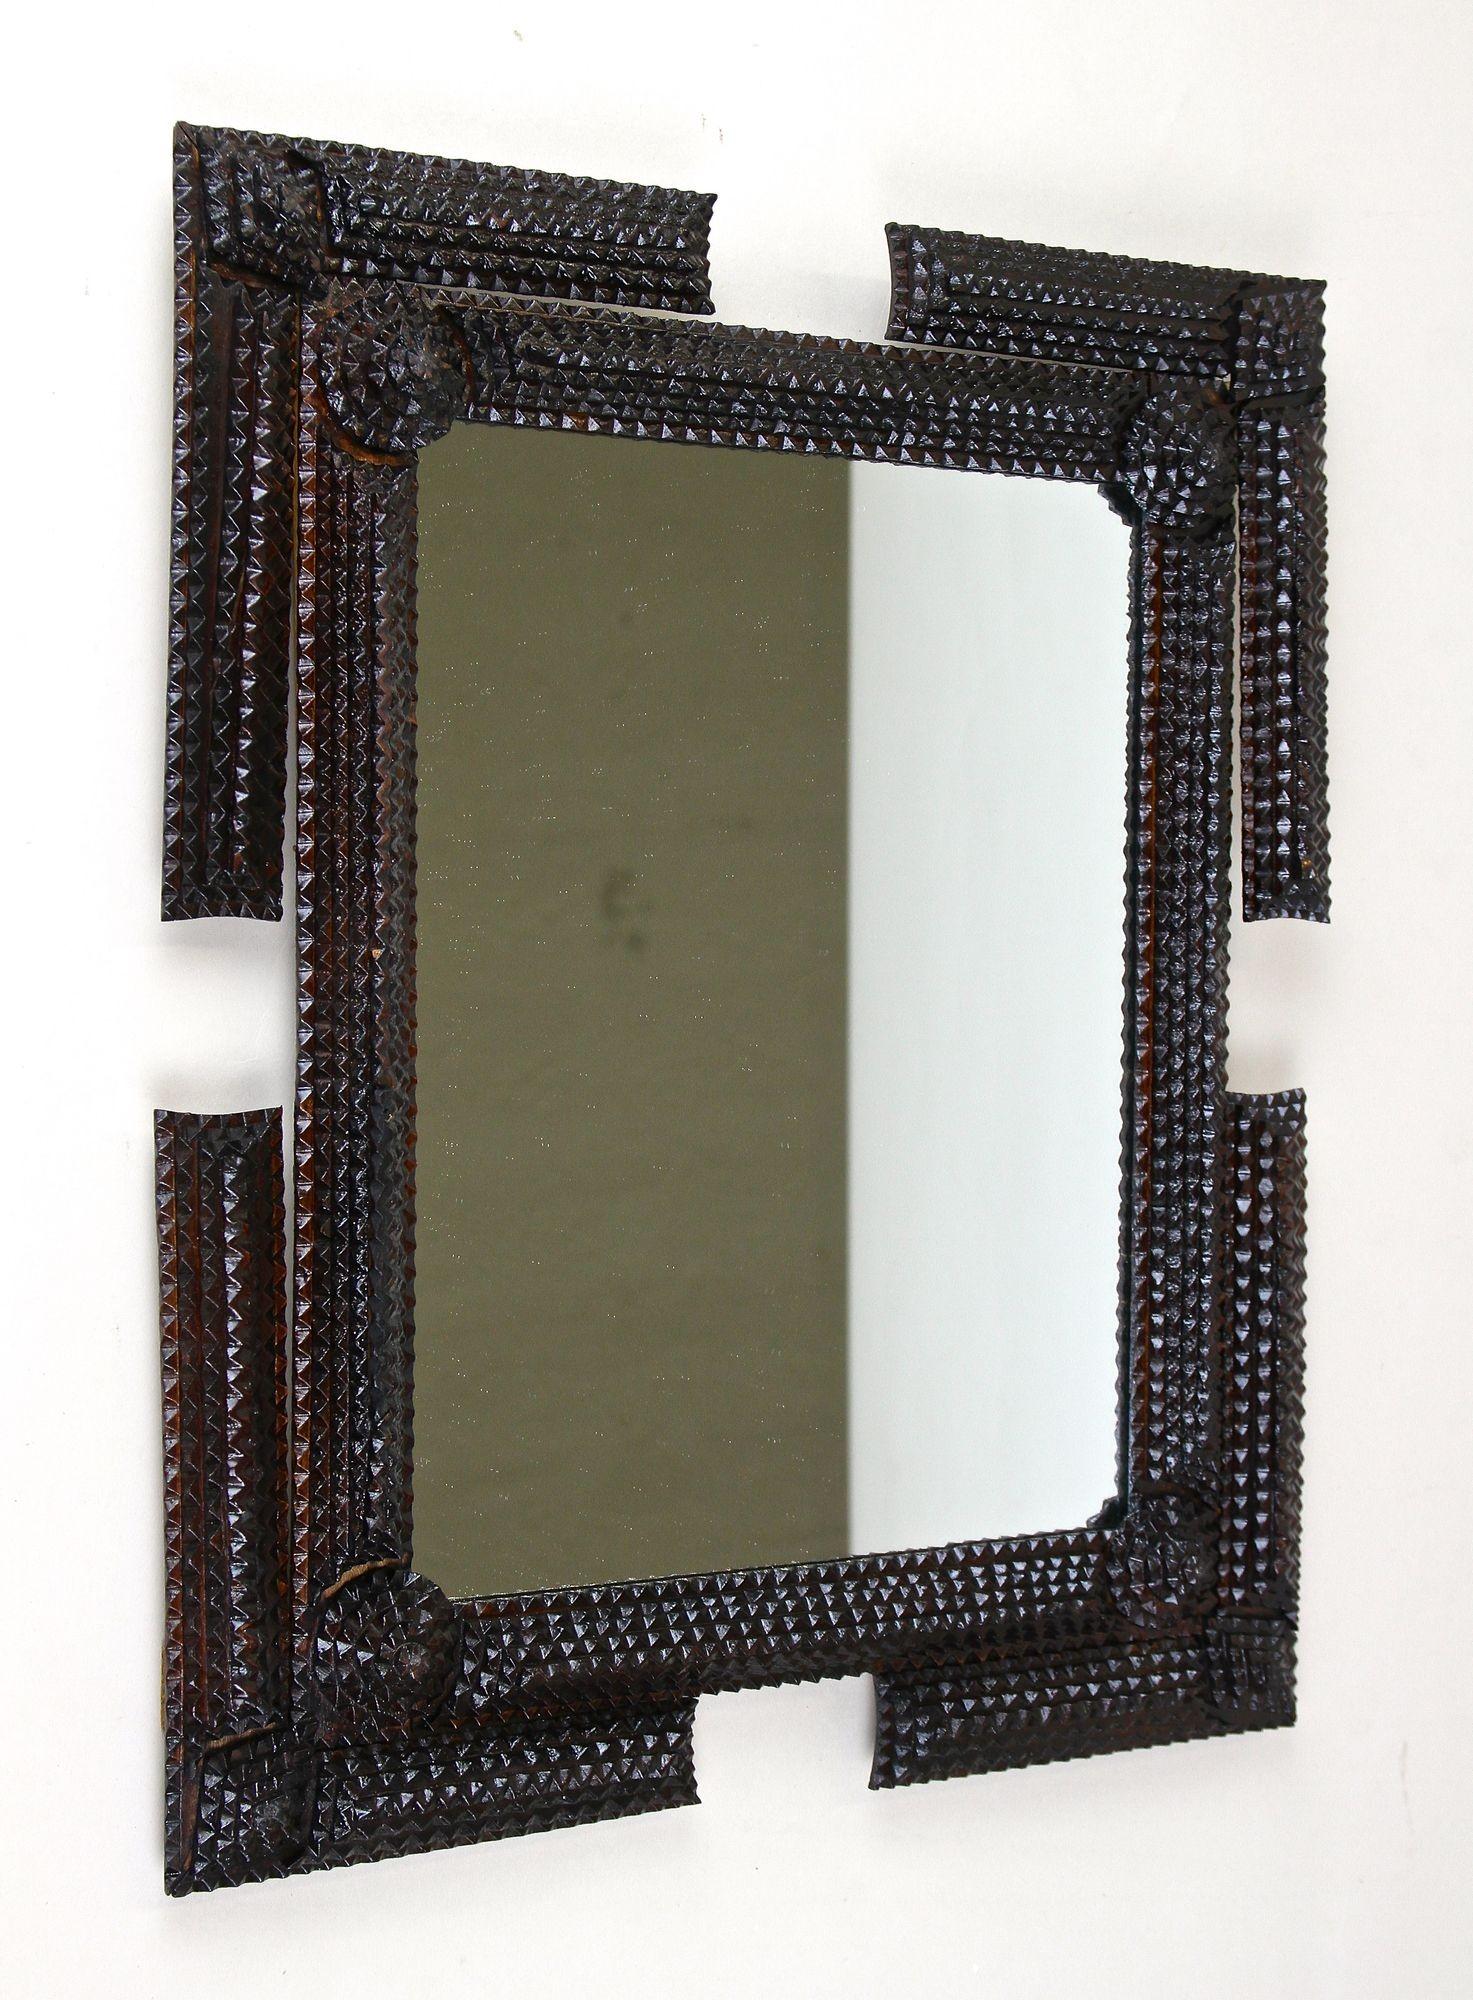 Exceptional rustic Tramp Art wall mirror from the late 19th century period in Austria around 1870. This very elaborately hand carved mirror impresses with an outstanding designed frame which is adorned by elaborately worked chip carvings. The